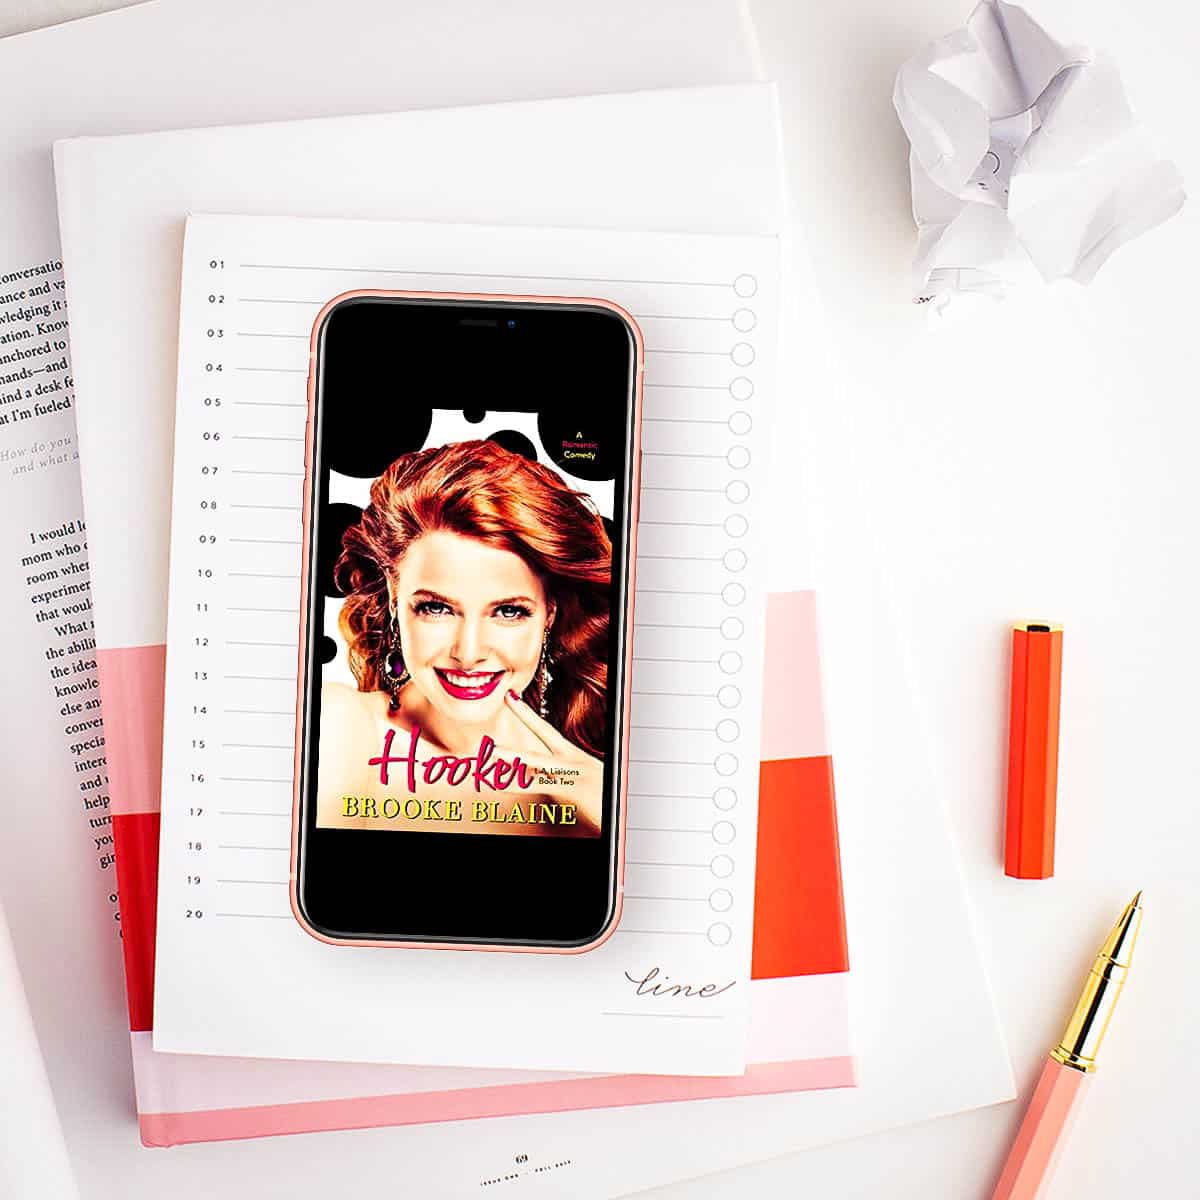 Hooker by Brooke Blaine, the second book in the romantic comedy LA Liaisons series, follows Shayne as she searches for love as a professional matchmaker in Los Angeles